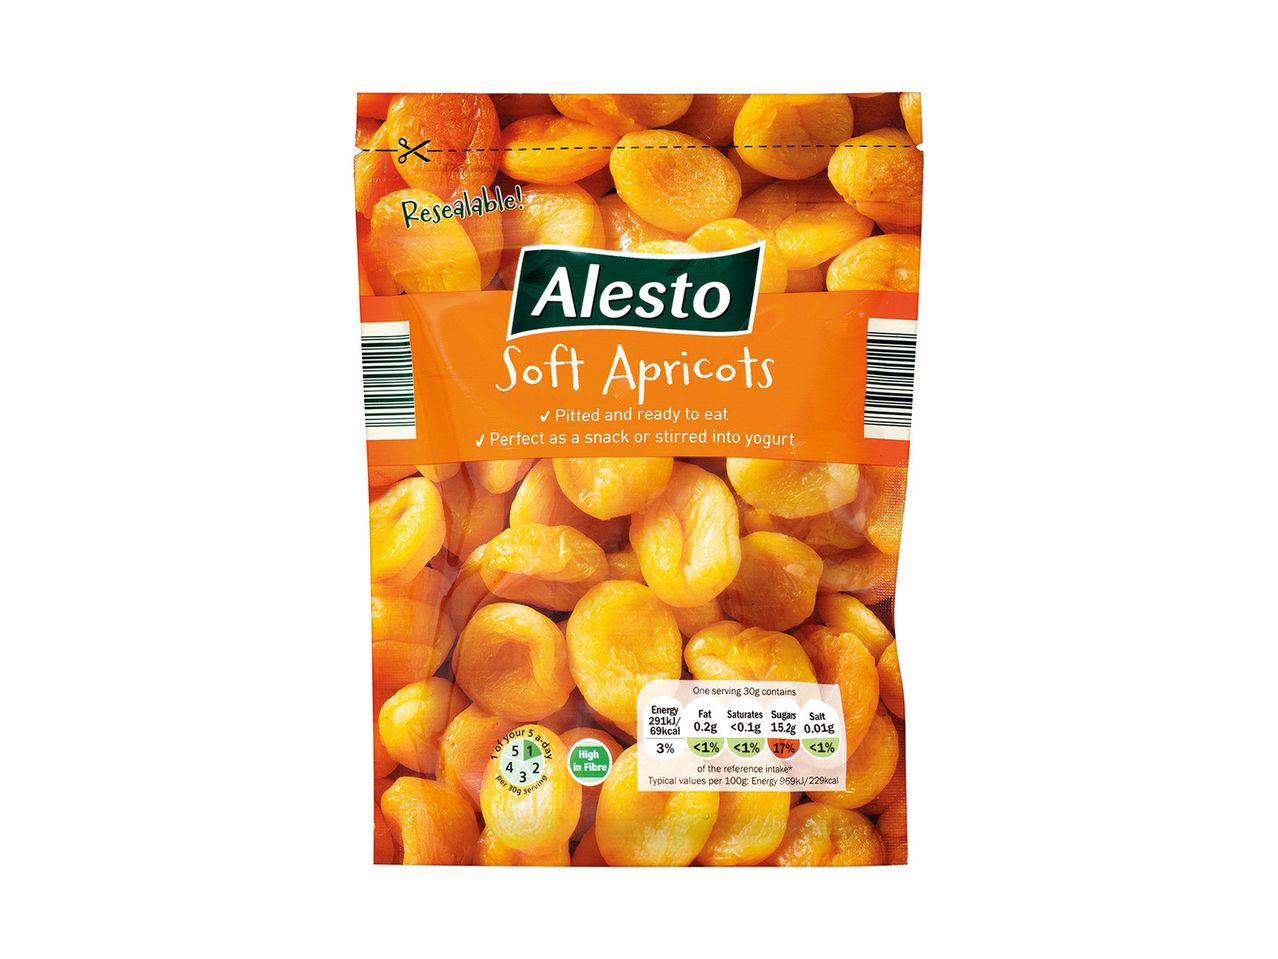 Go to full screen view: Alesto Soft Pitted Apricots - Image 1